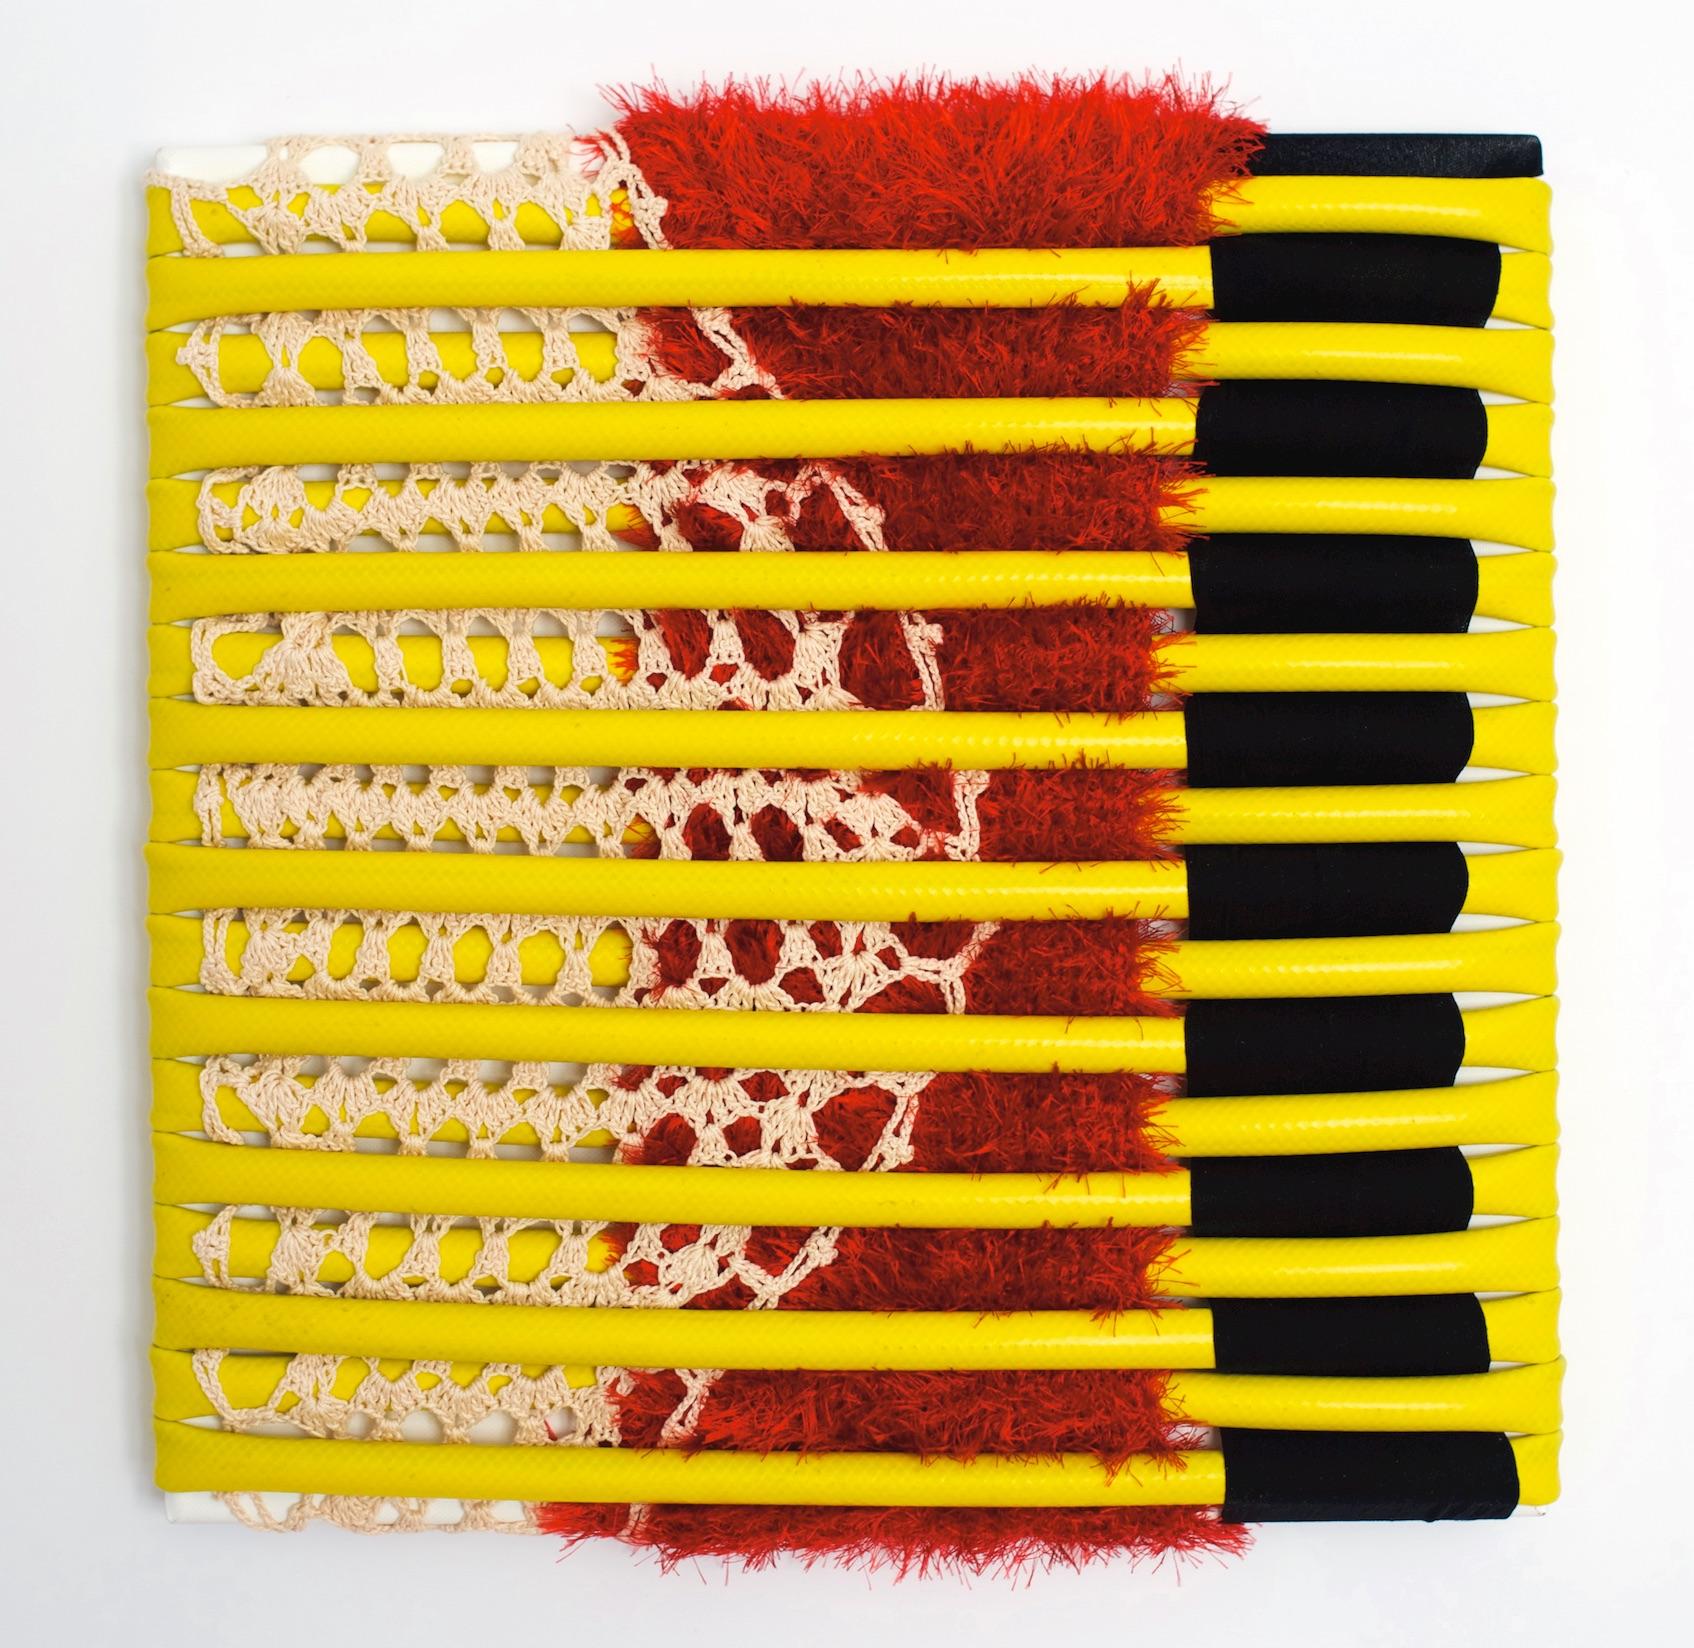 Untitled 1 (yellow, red, black, fabric wall art, abstract sculpture, stripes)